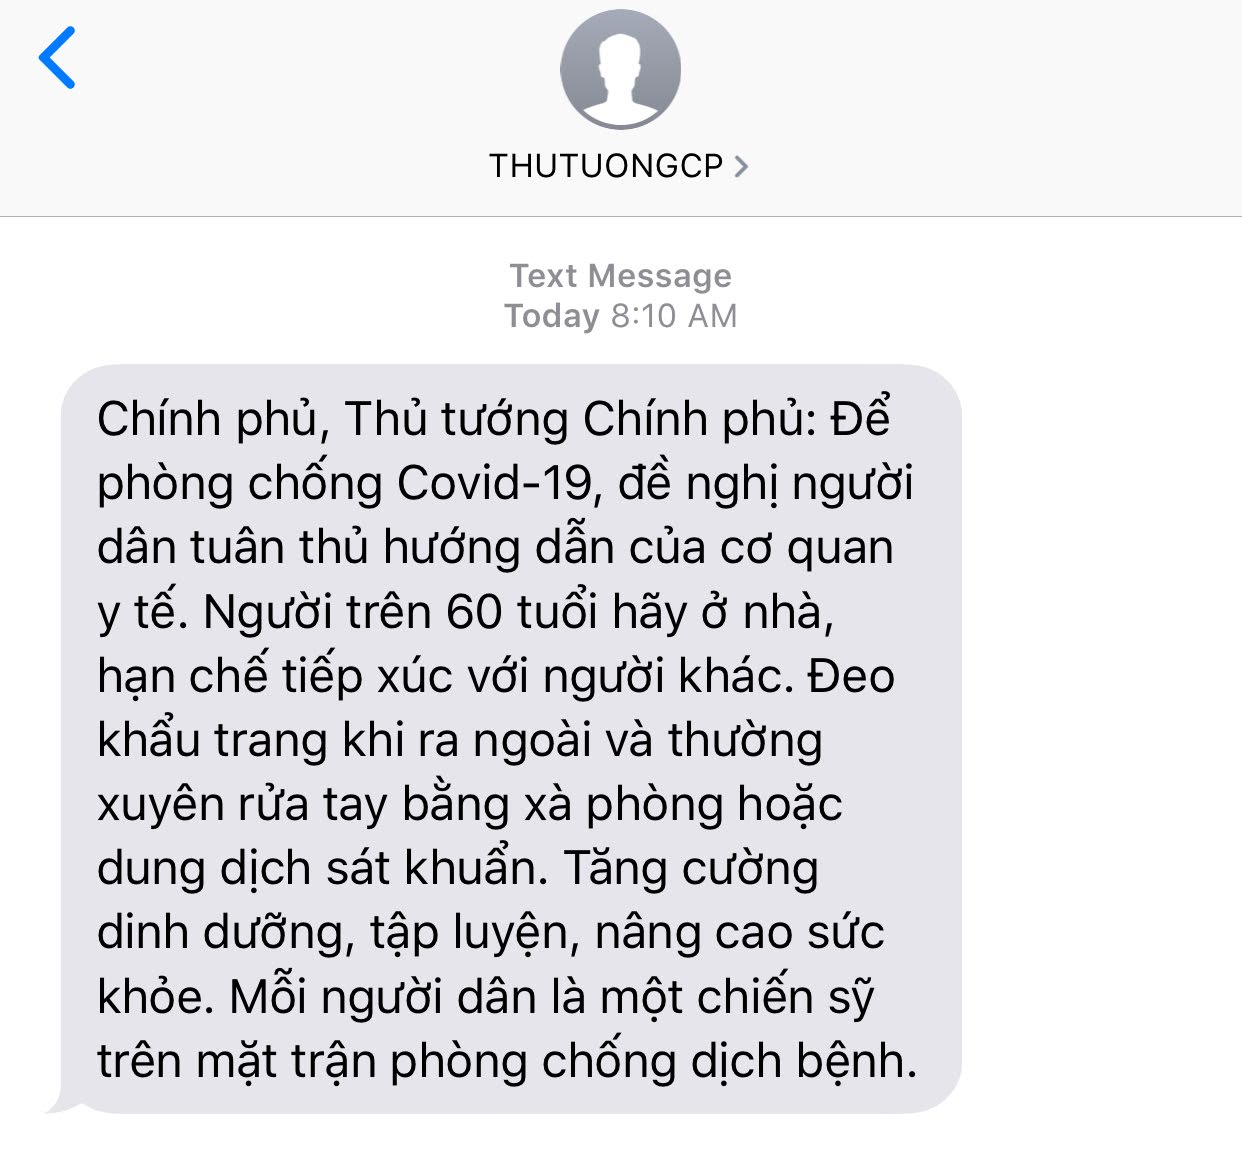 A screenshot shows the message of COVID-19 from the Vietnamese Prime Minister to a citizen